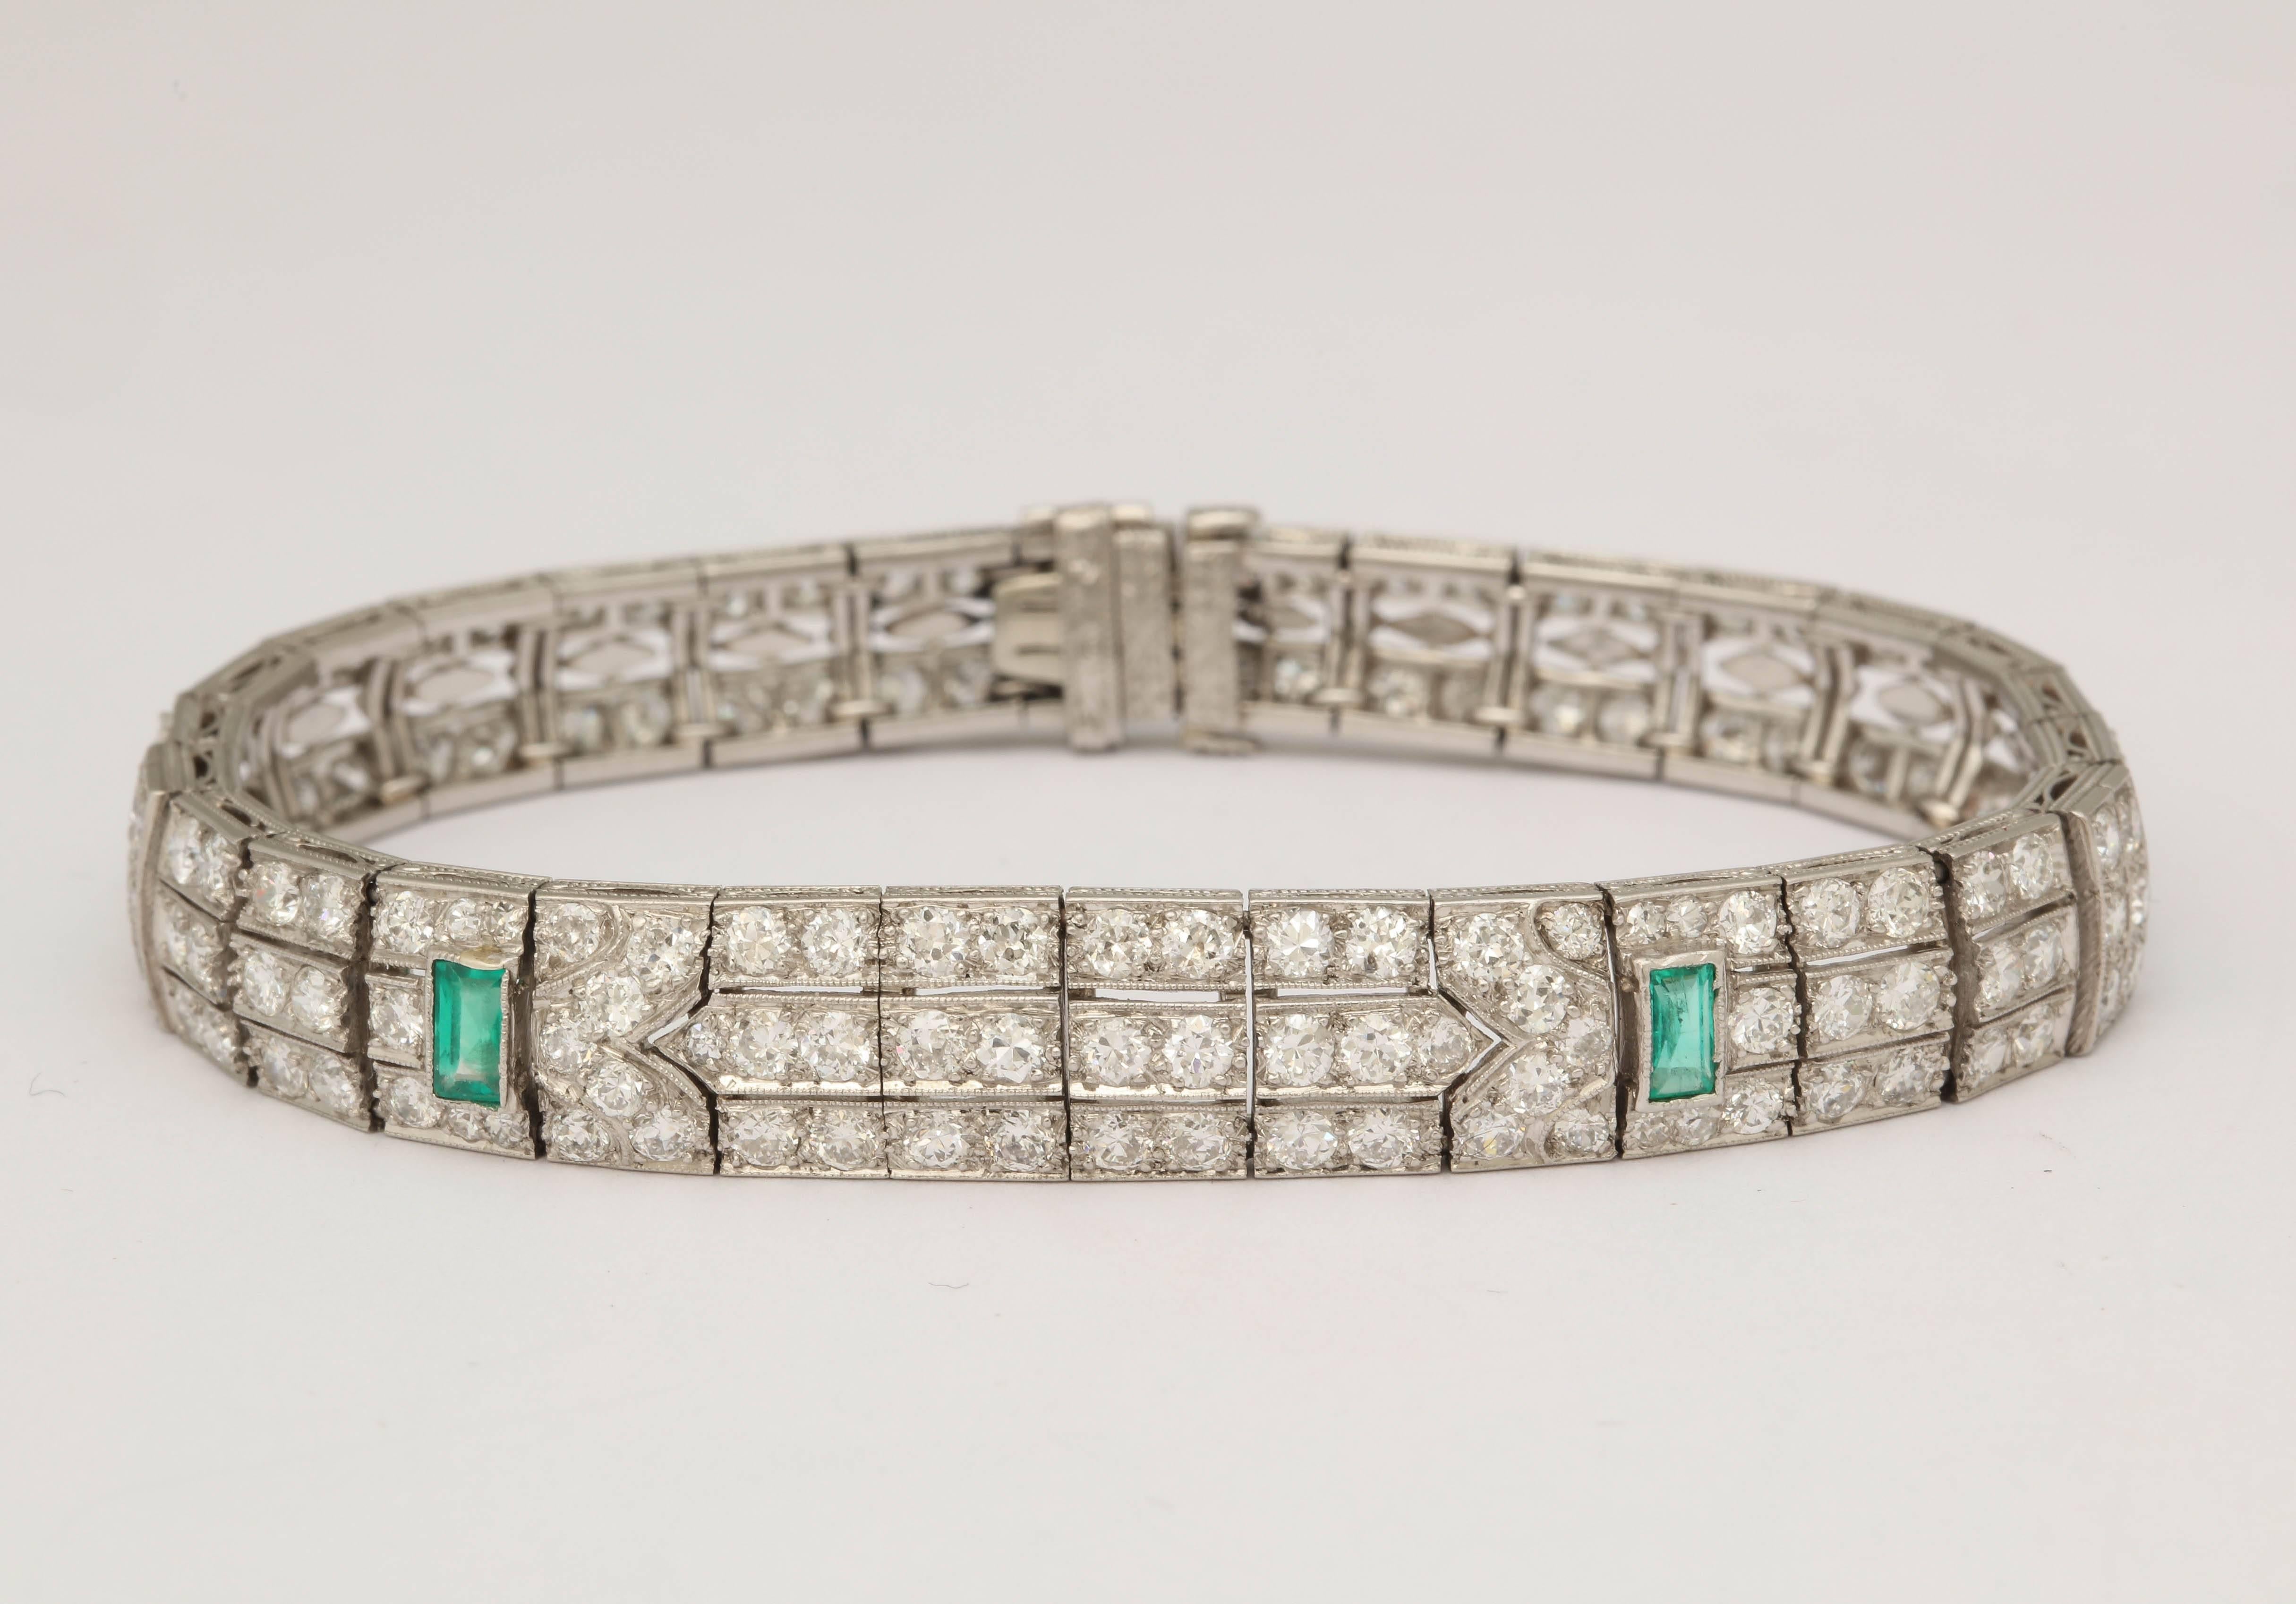 One Ladies Handmade Elegant Flexible Triple Straightline Bracelet Embellished With Numerous Antique Cut Diamonds Weighing Approximately 7 Carats total weight.. Further Designed With Eight Calibre Cut. Square Cut Beautiful Color Emeralds Weighing